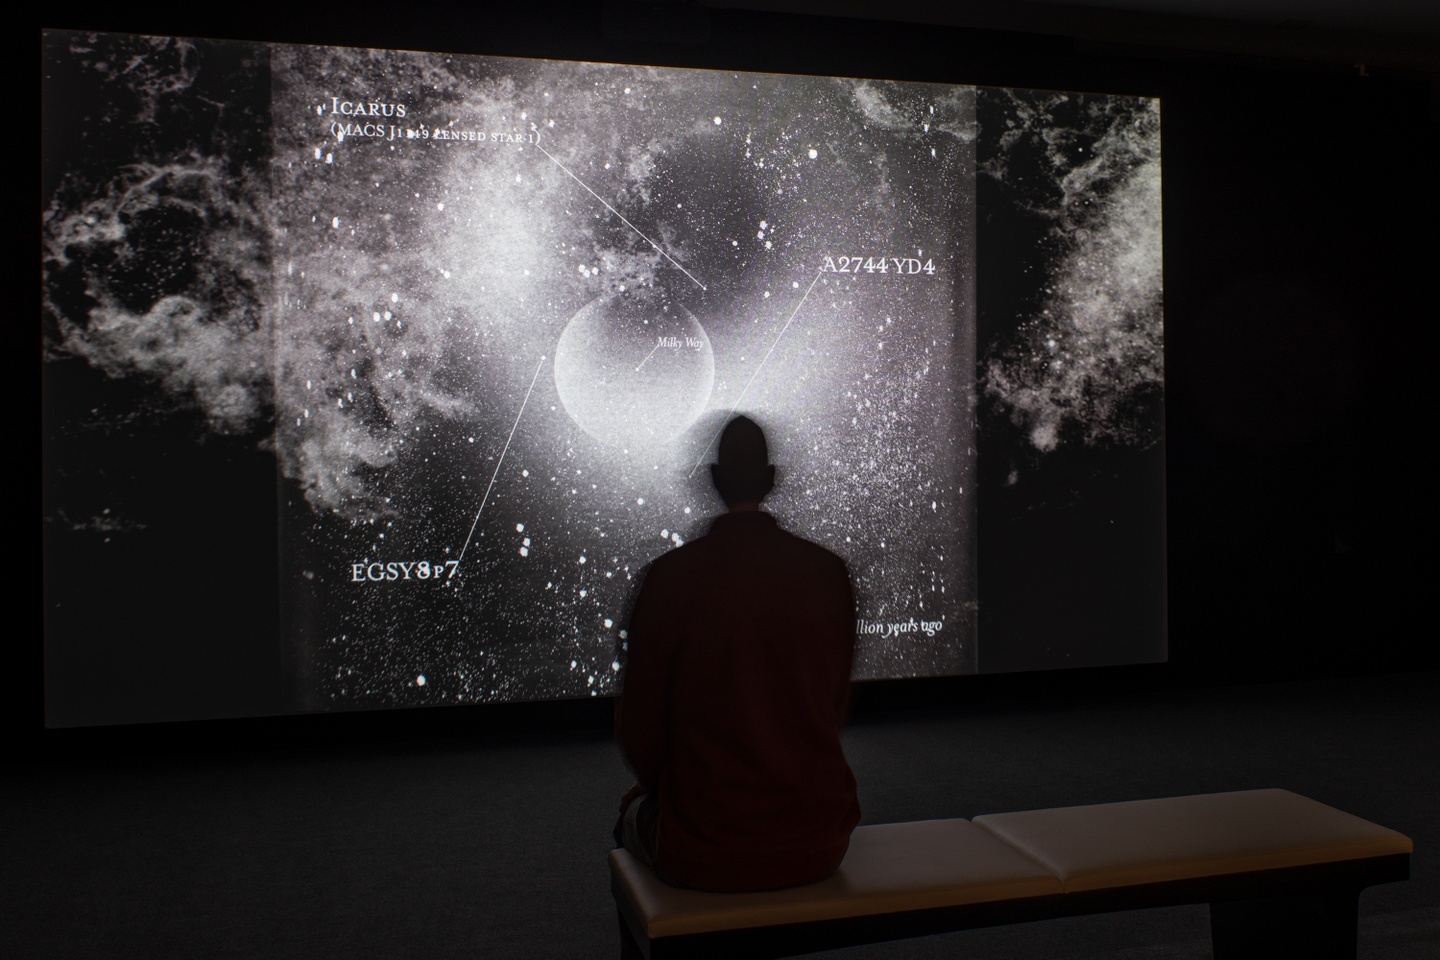 Mostly black-and-white video still of a person seated on a dark tan bench, their back to the camera, staring at a screen displaying a view of the galaxy, with the Milky Way, Icarus, and a couple of other elements pointed out.